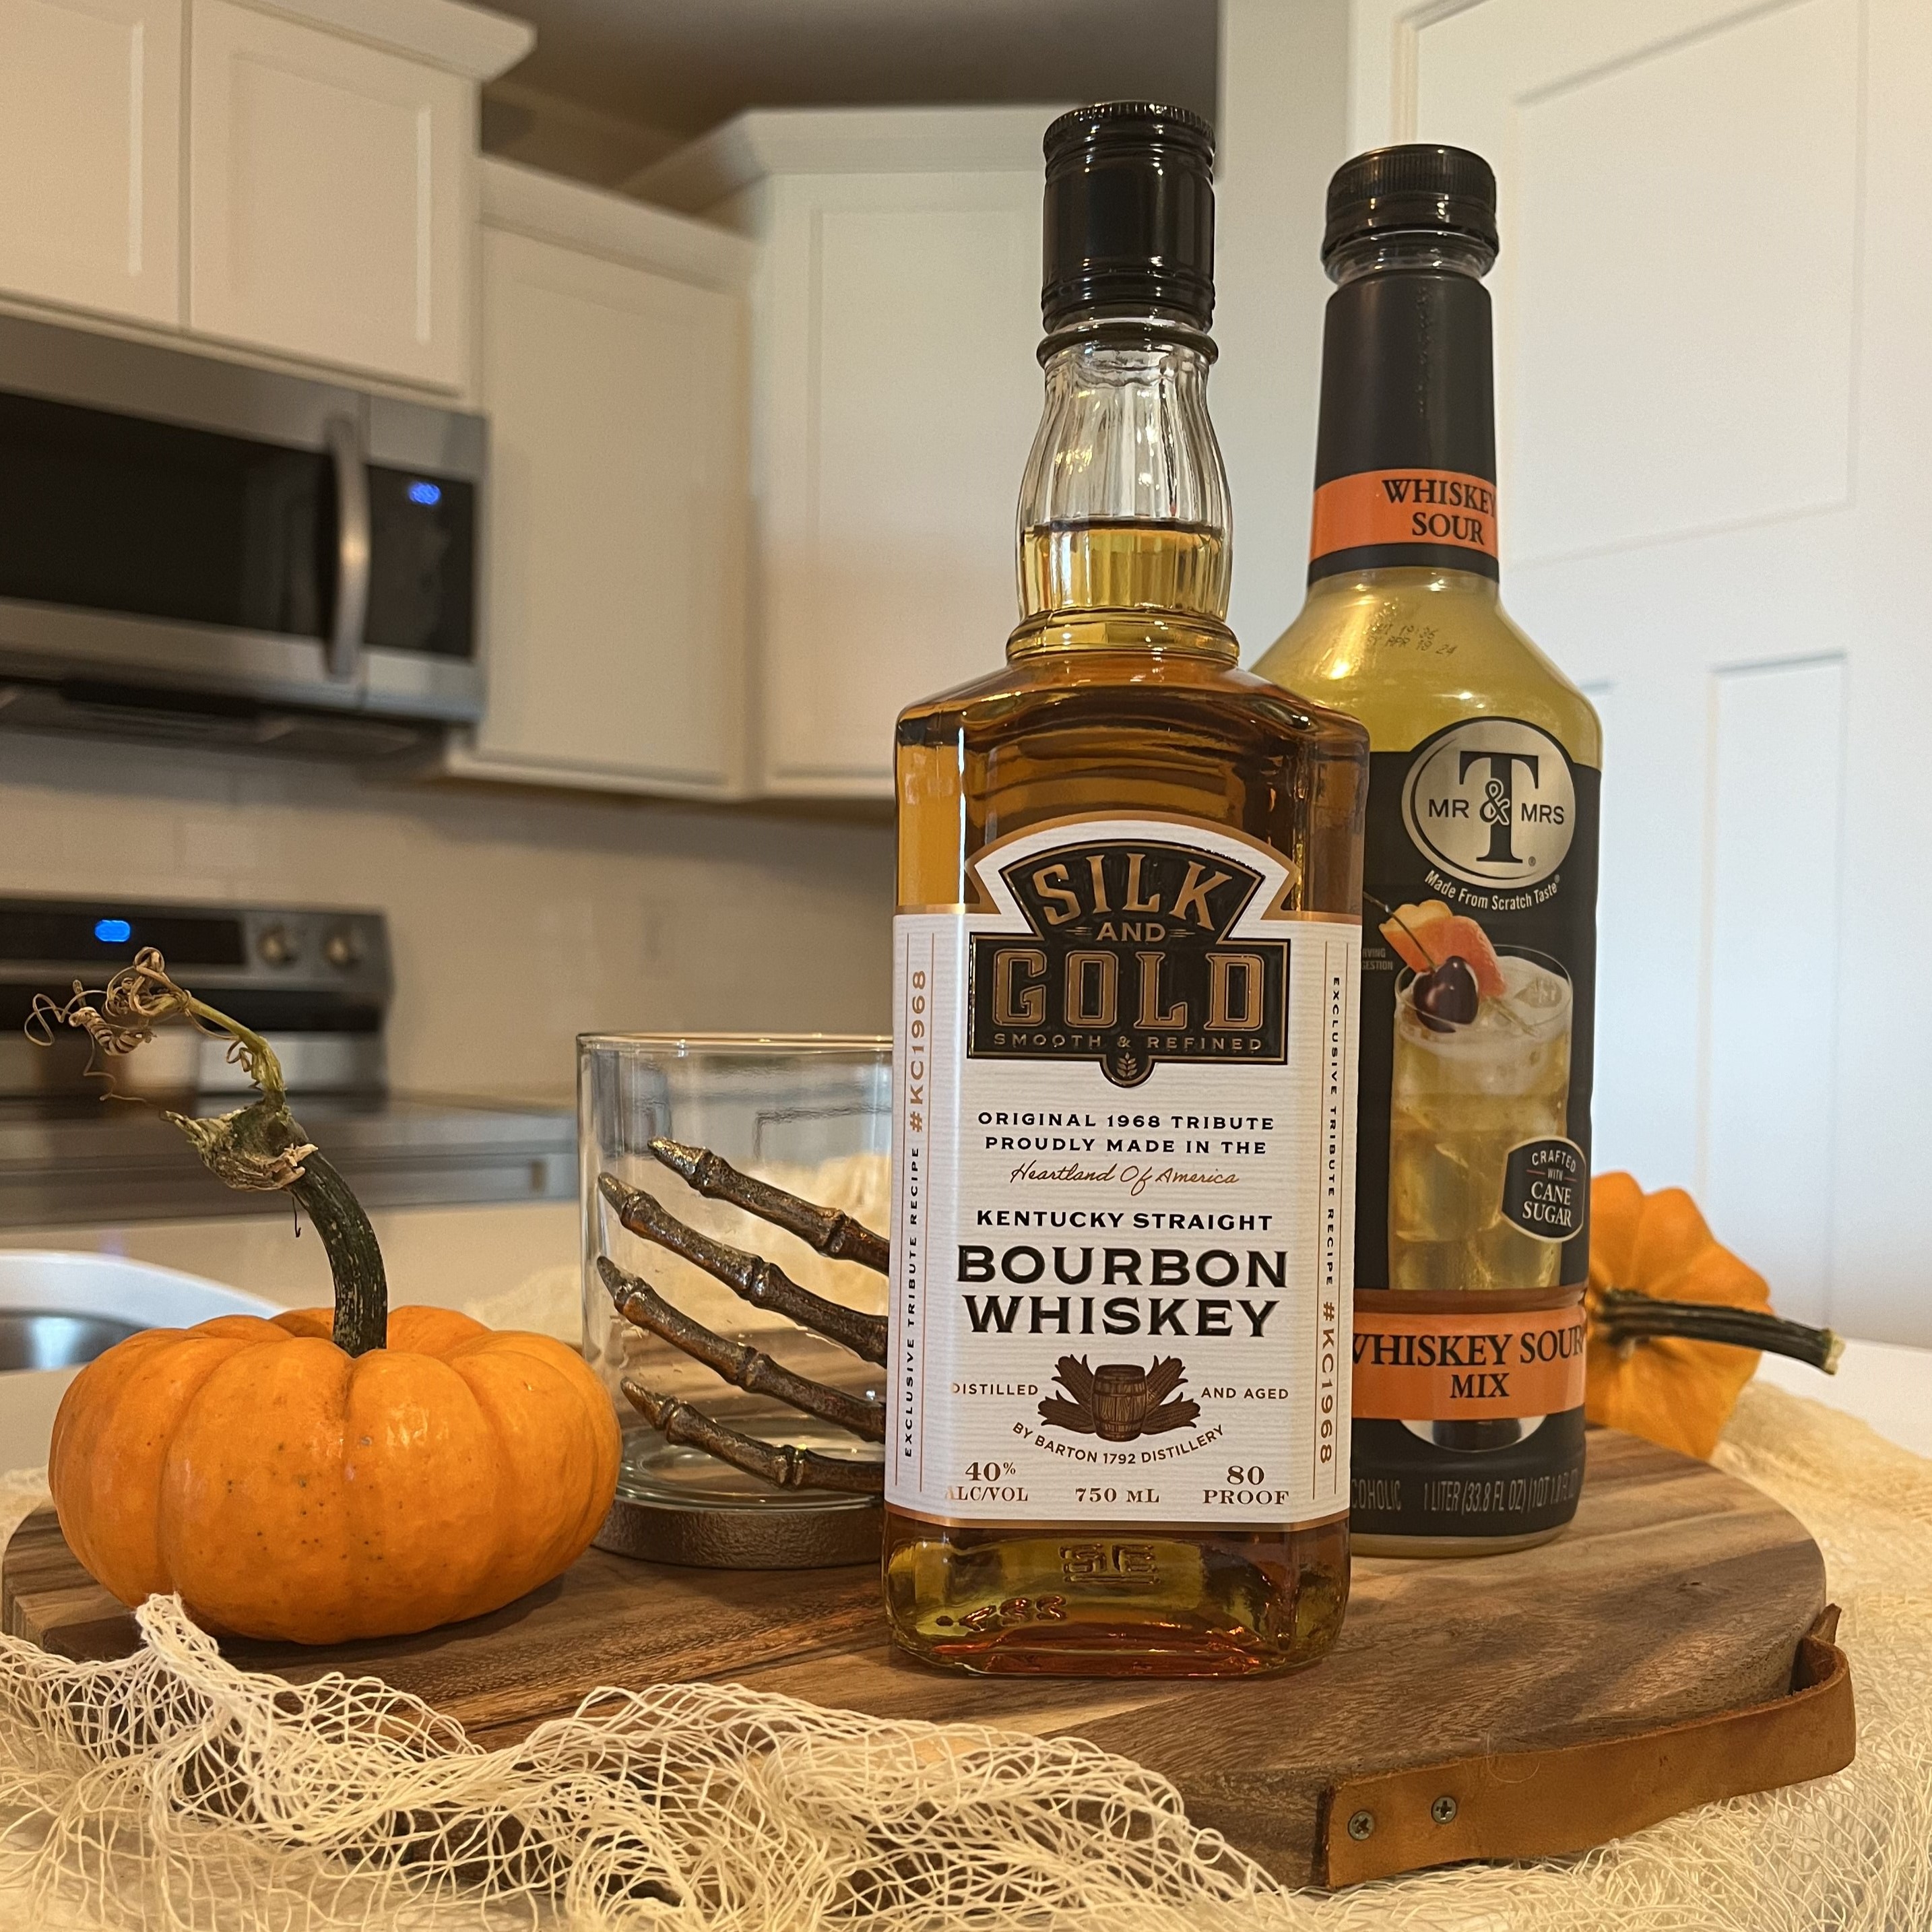 Ingredients to make a Dark & Stormy Whiskey Sour for a Halloween alcoholic drink